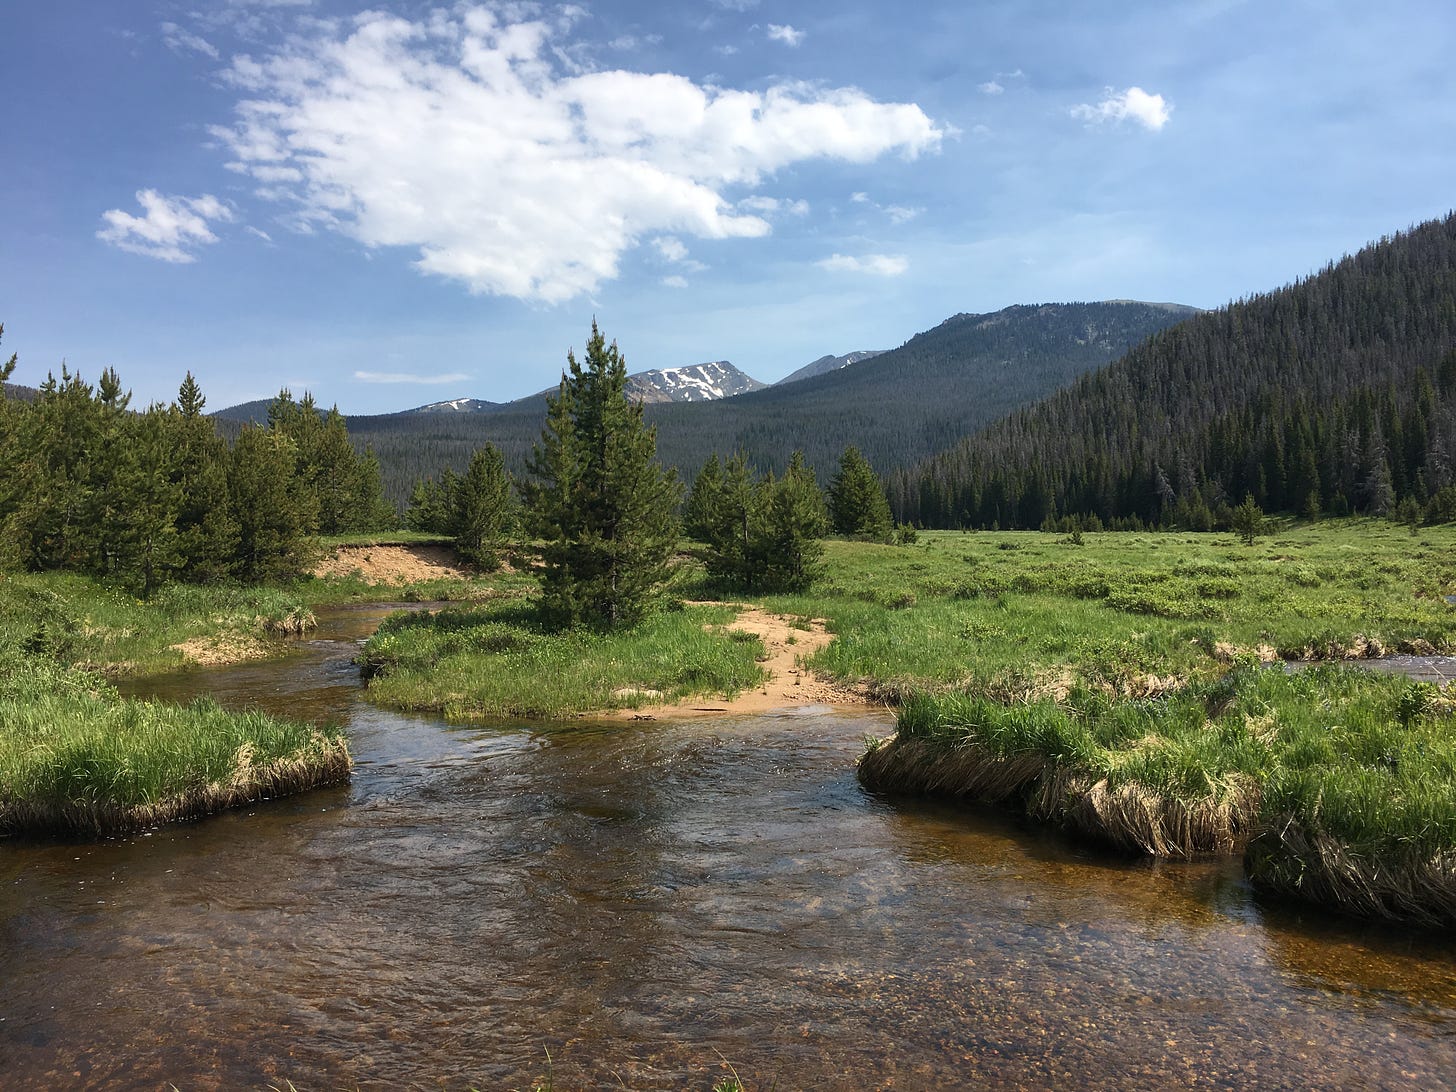 beautiful scene of a stream in the Rocky Mountain National Park